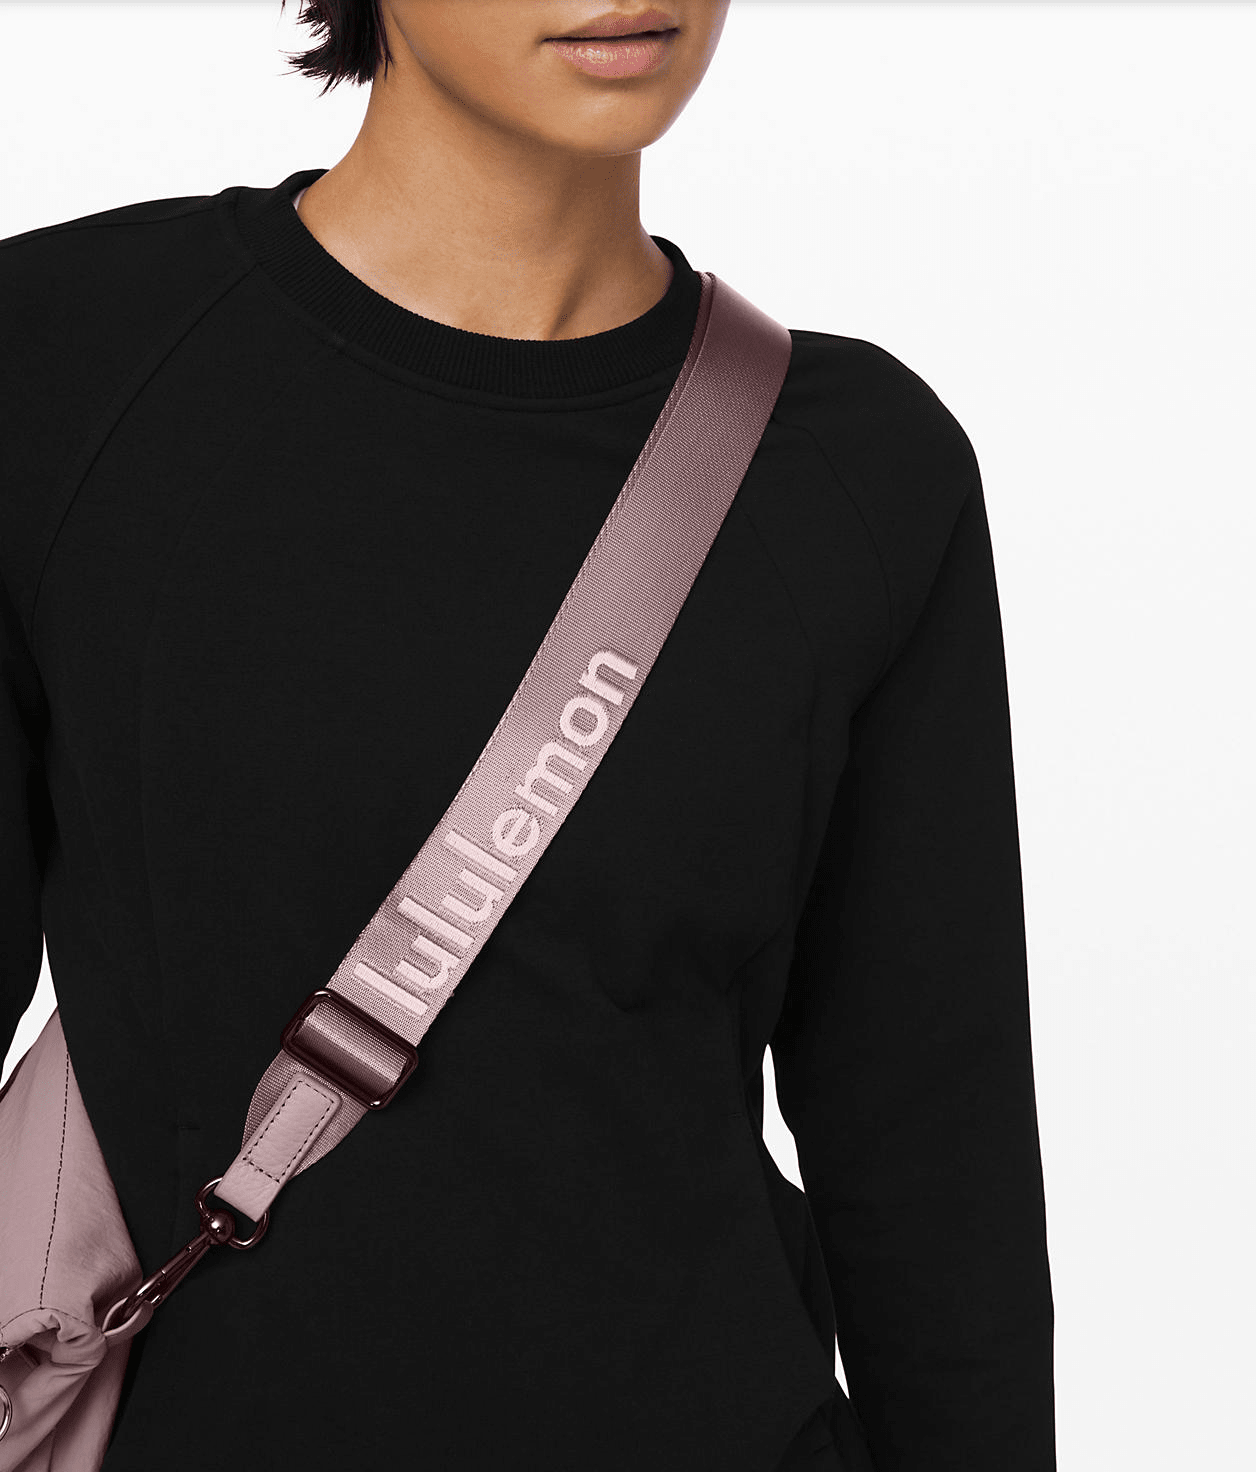 Changeable Thick Strap for Cross Body Bag – LoverofLuxe